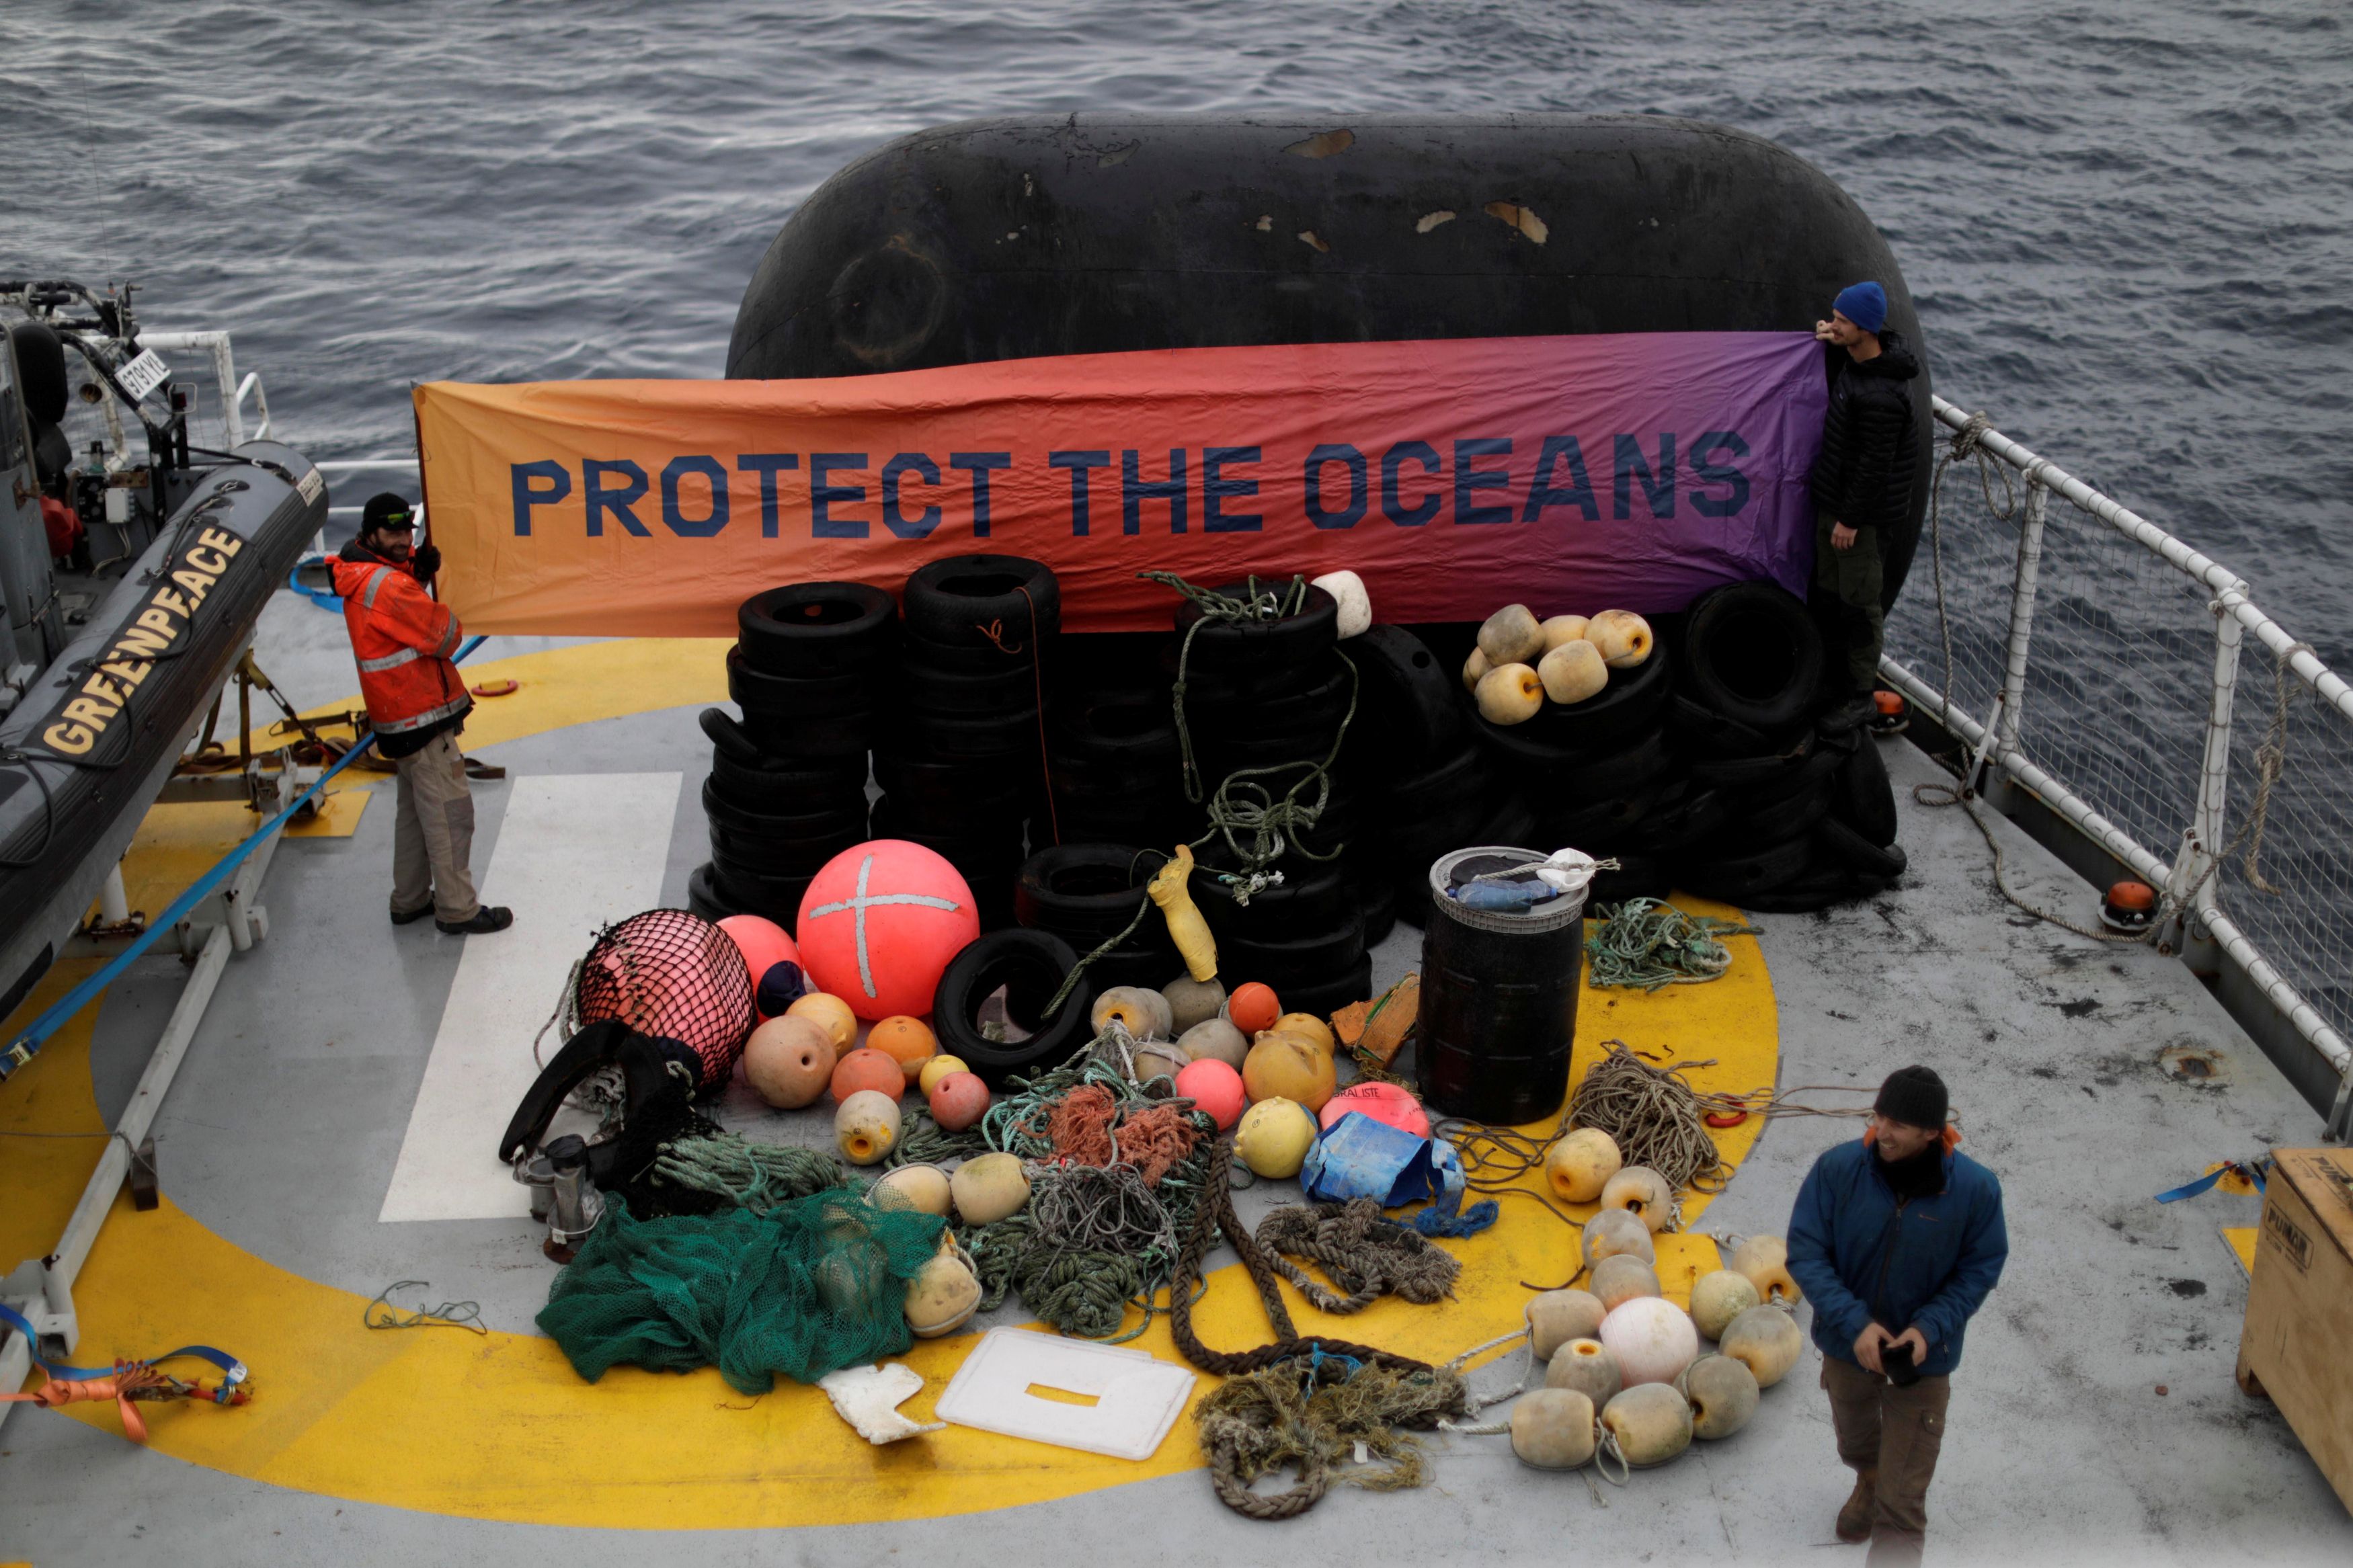 Climate change activists from Greenpeace, hold up a sign reading 'protect the oceans', in front of rubbish collected from the islands of Antarctica, on the Esperanza Ship, close to Orne Harbor, Antarctica, February 6, 2020. Picture taken February 6, 2020. Reuters/Ueslei Marcelino